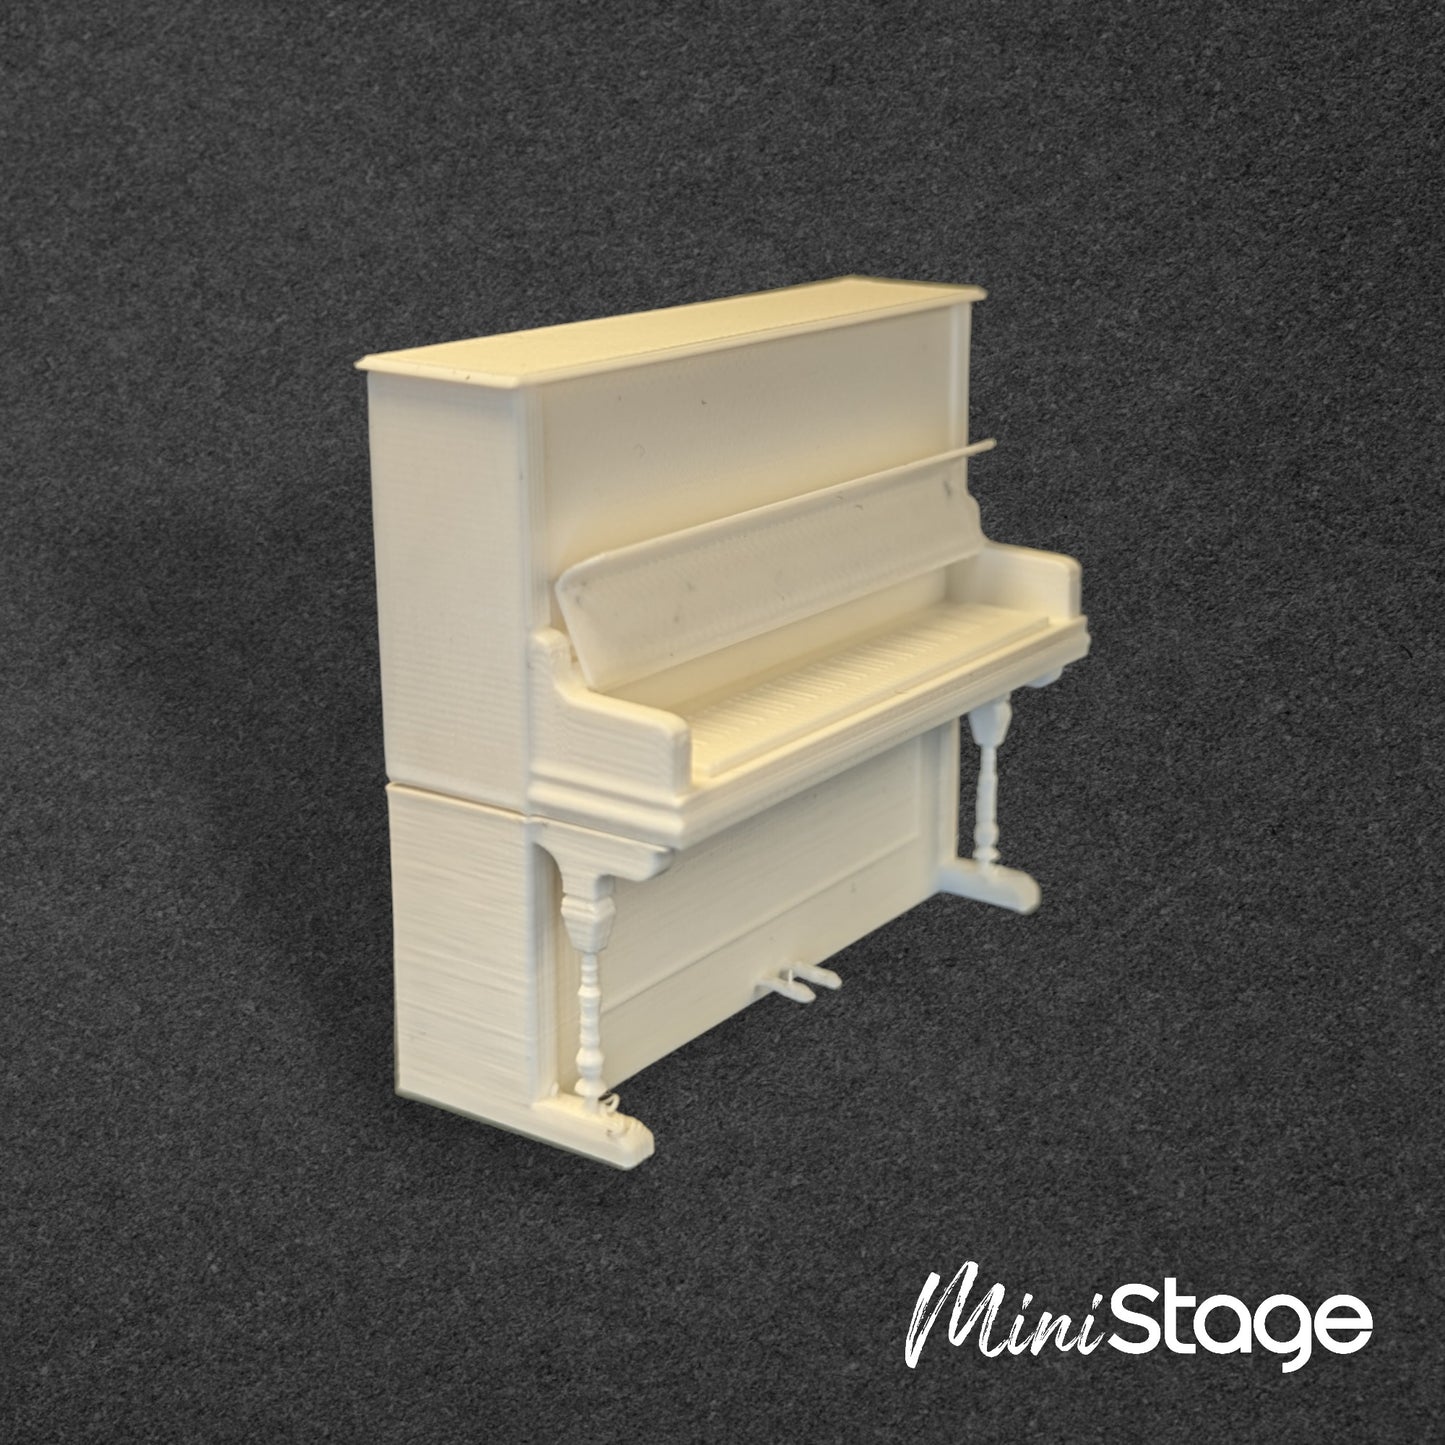 Scale 3D Printed Model of an Upright Piano